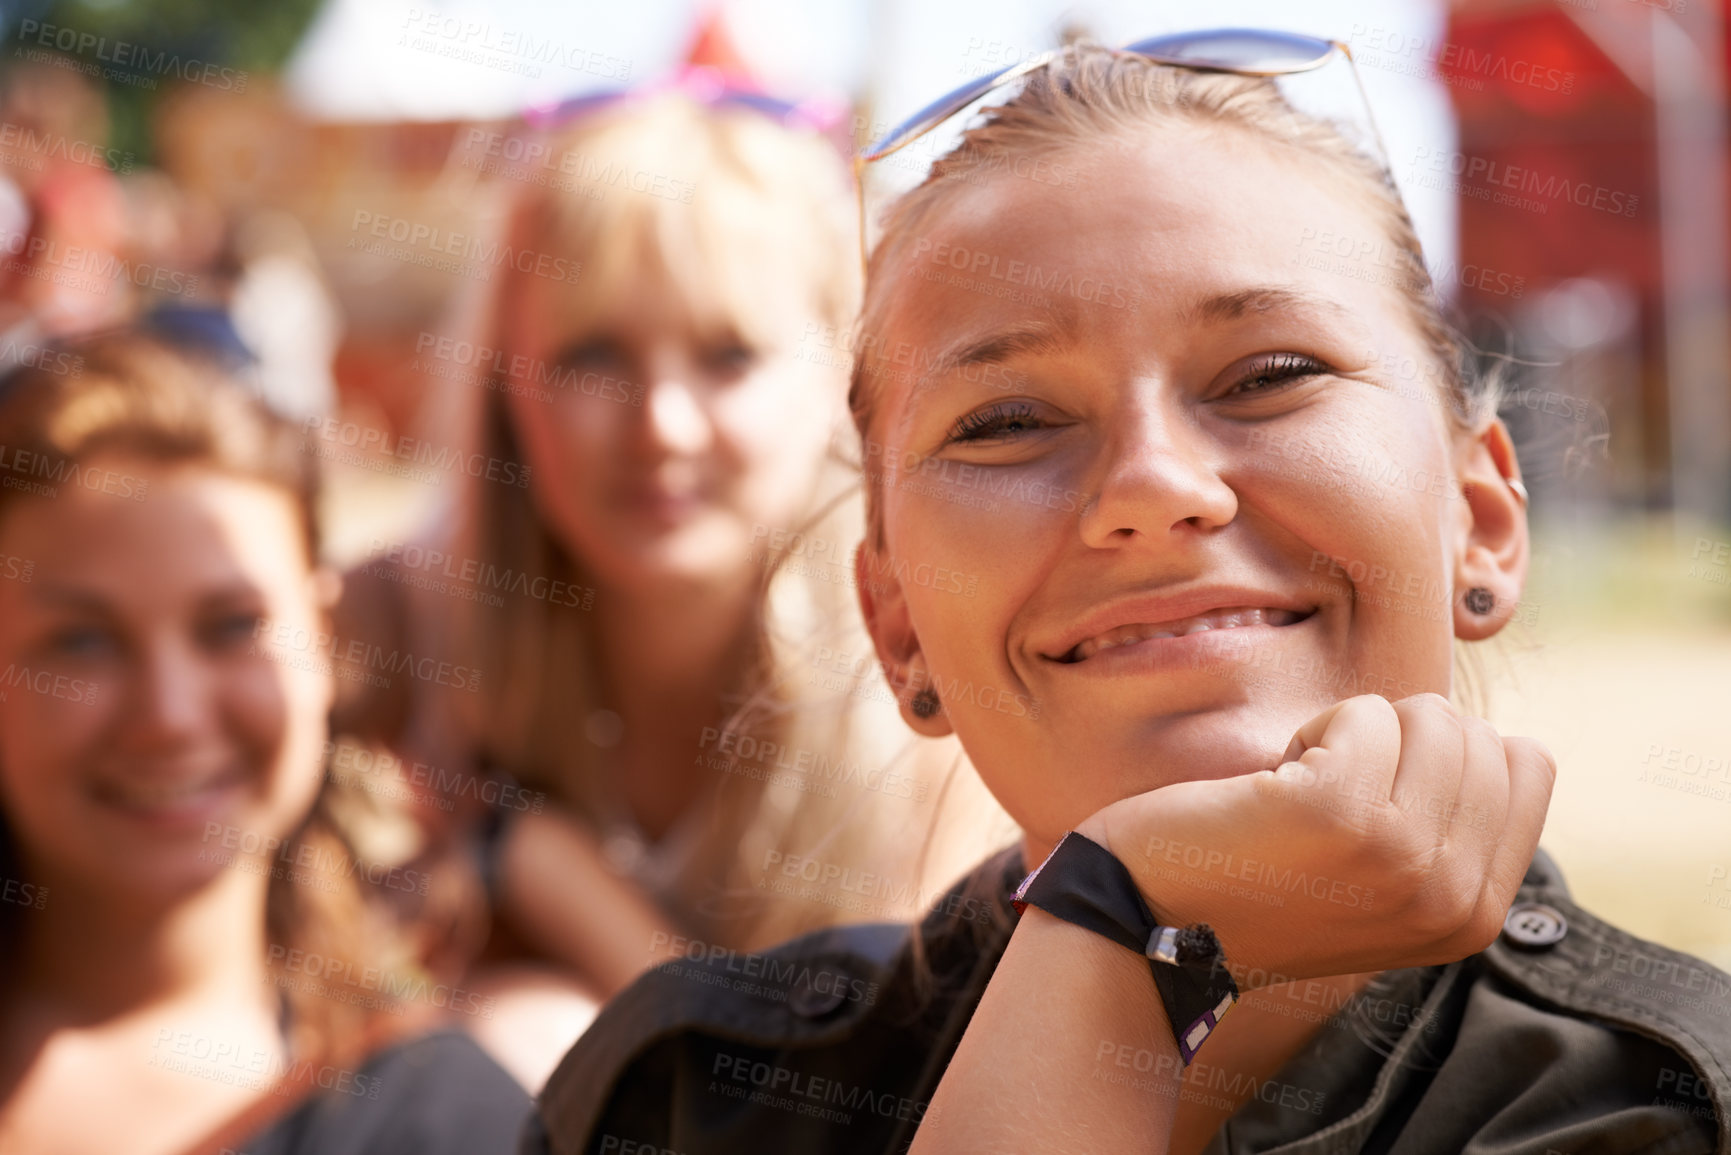 Buy stock photo portrait of happy young woman smiling with chin rested on her hand and friends sitting in the background